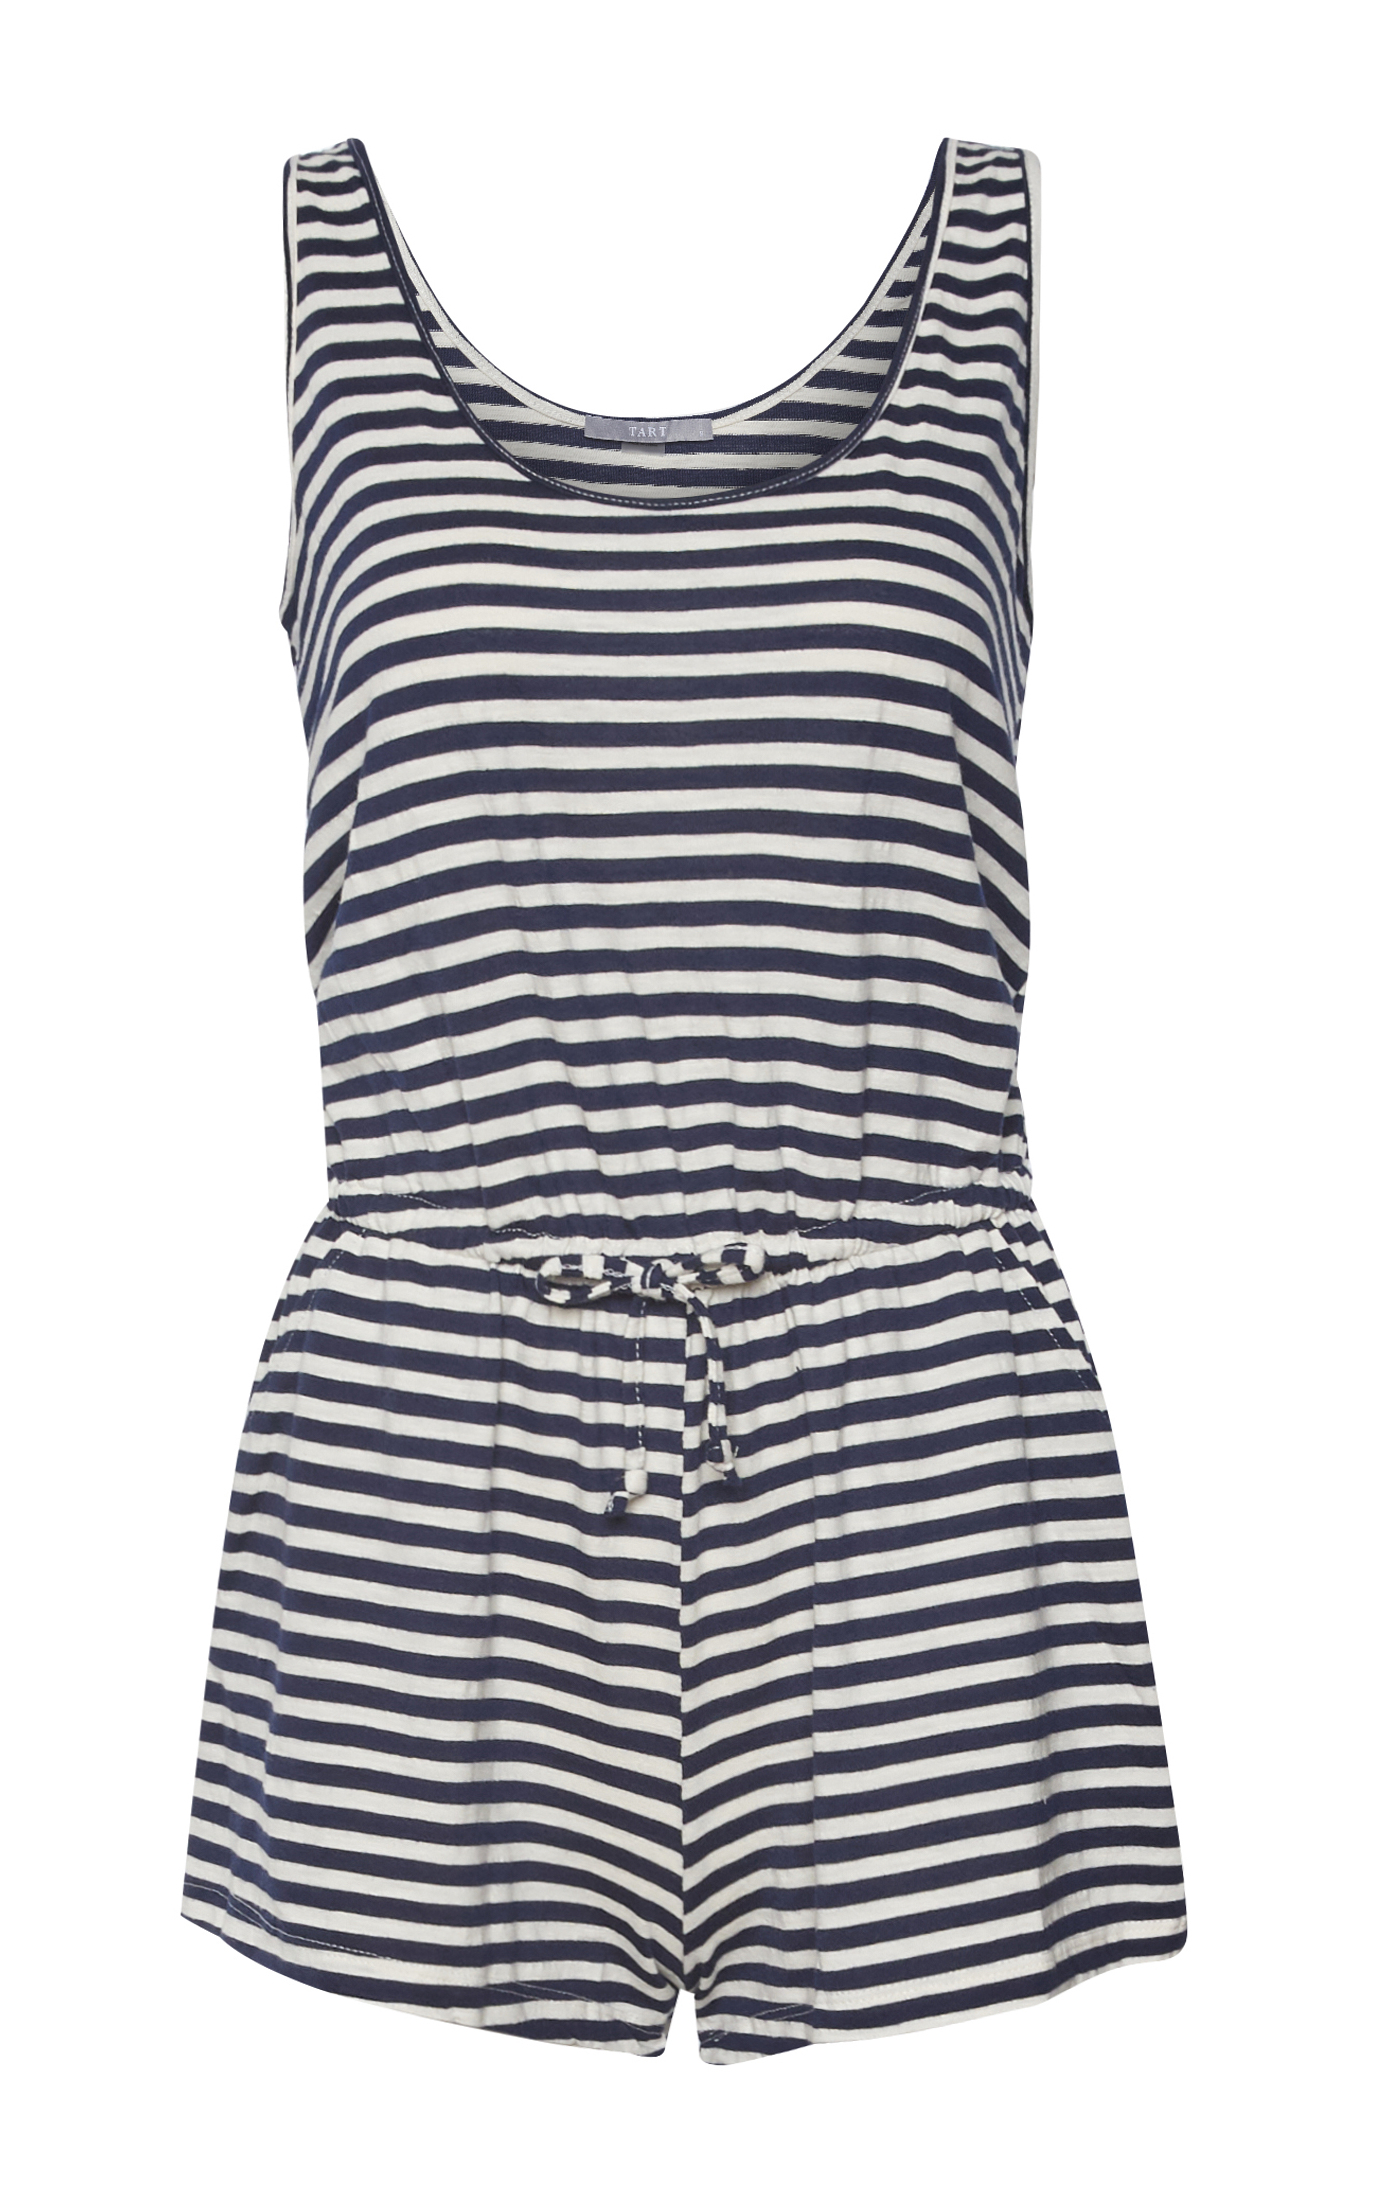 Tart Collections Striped Romper